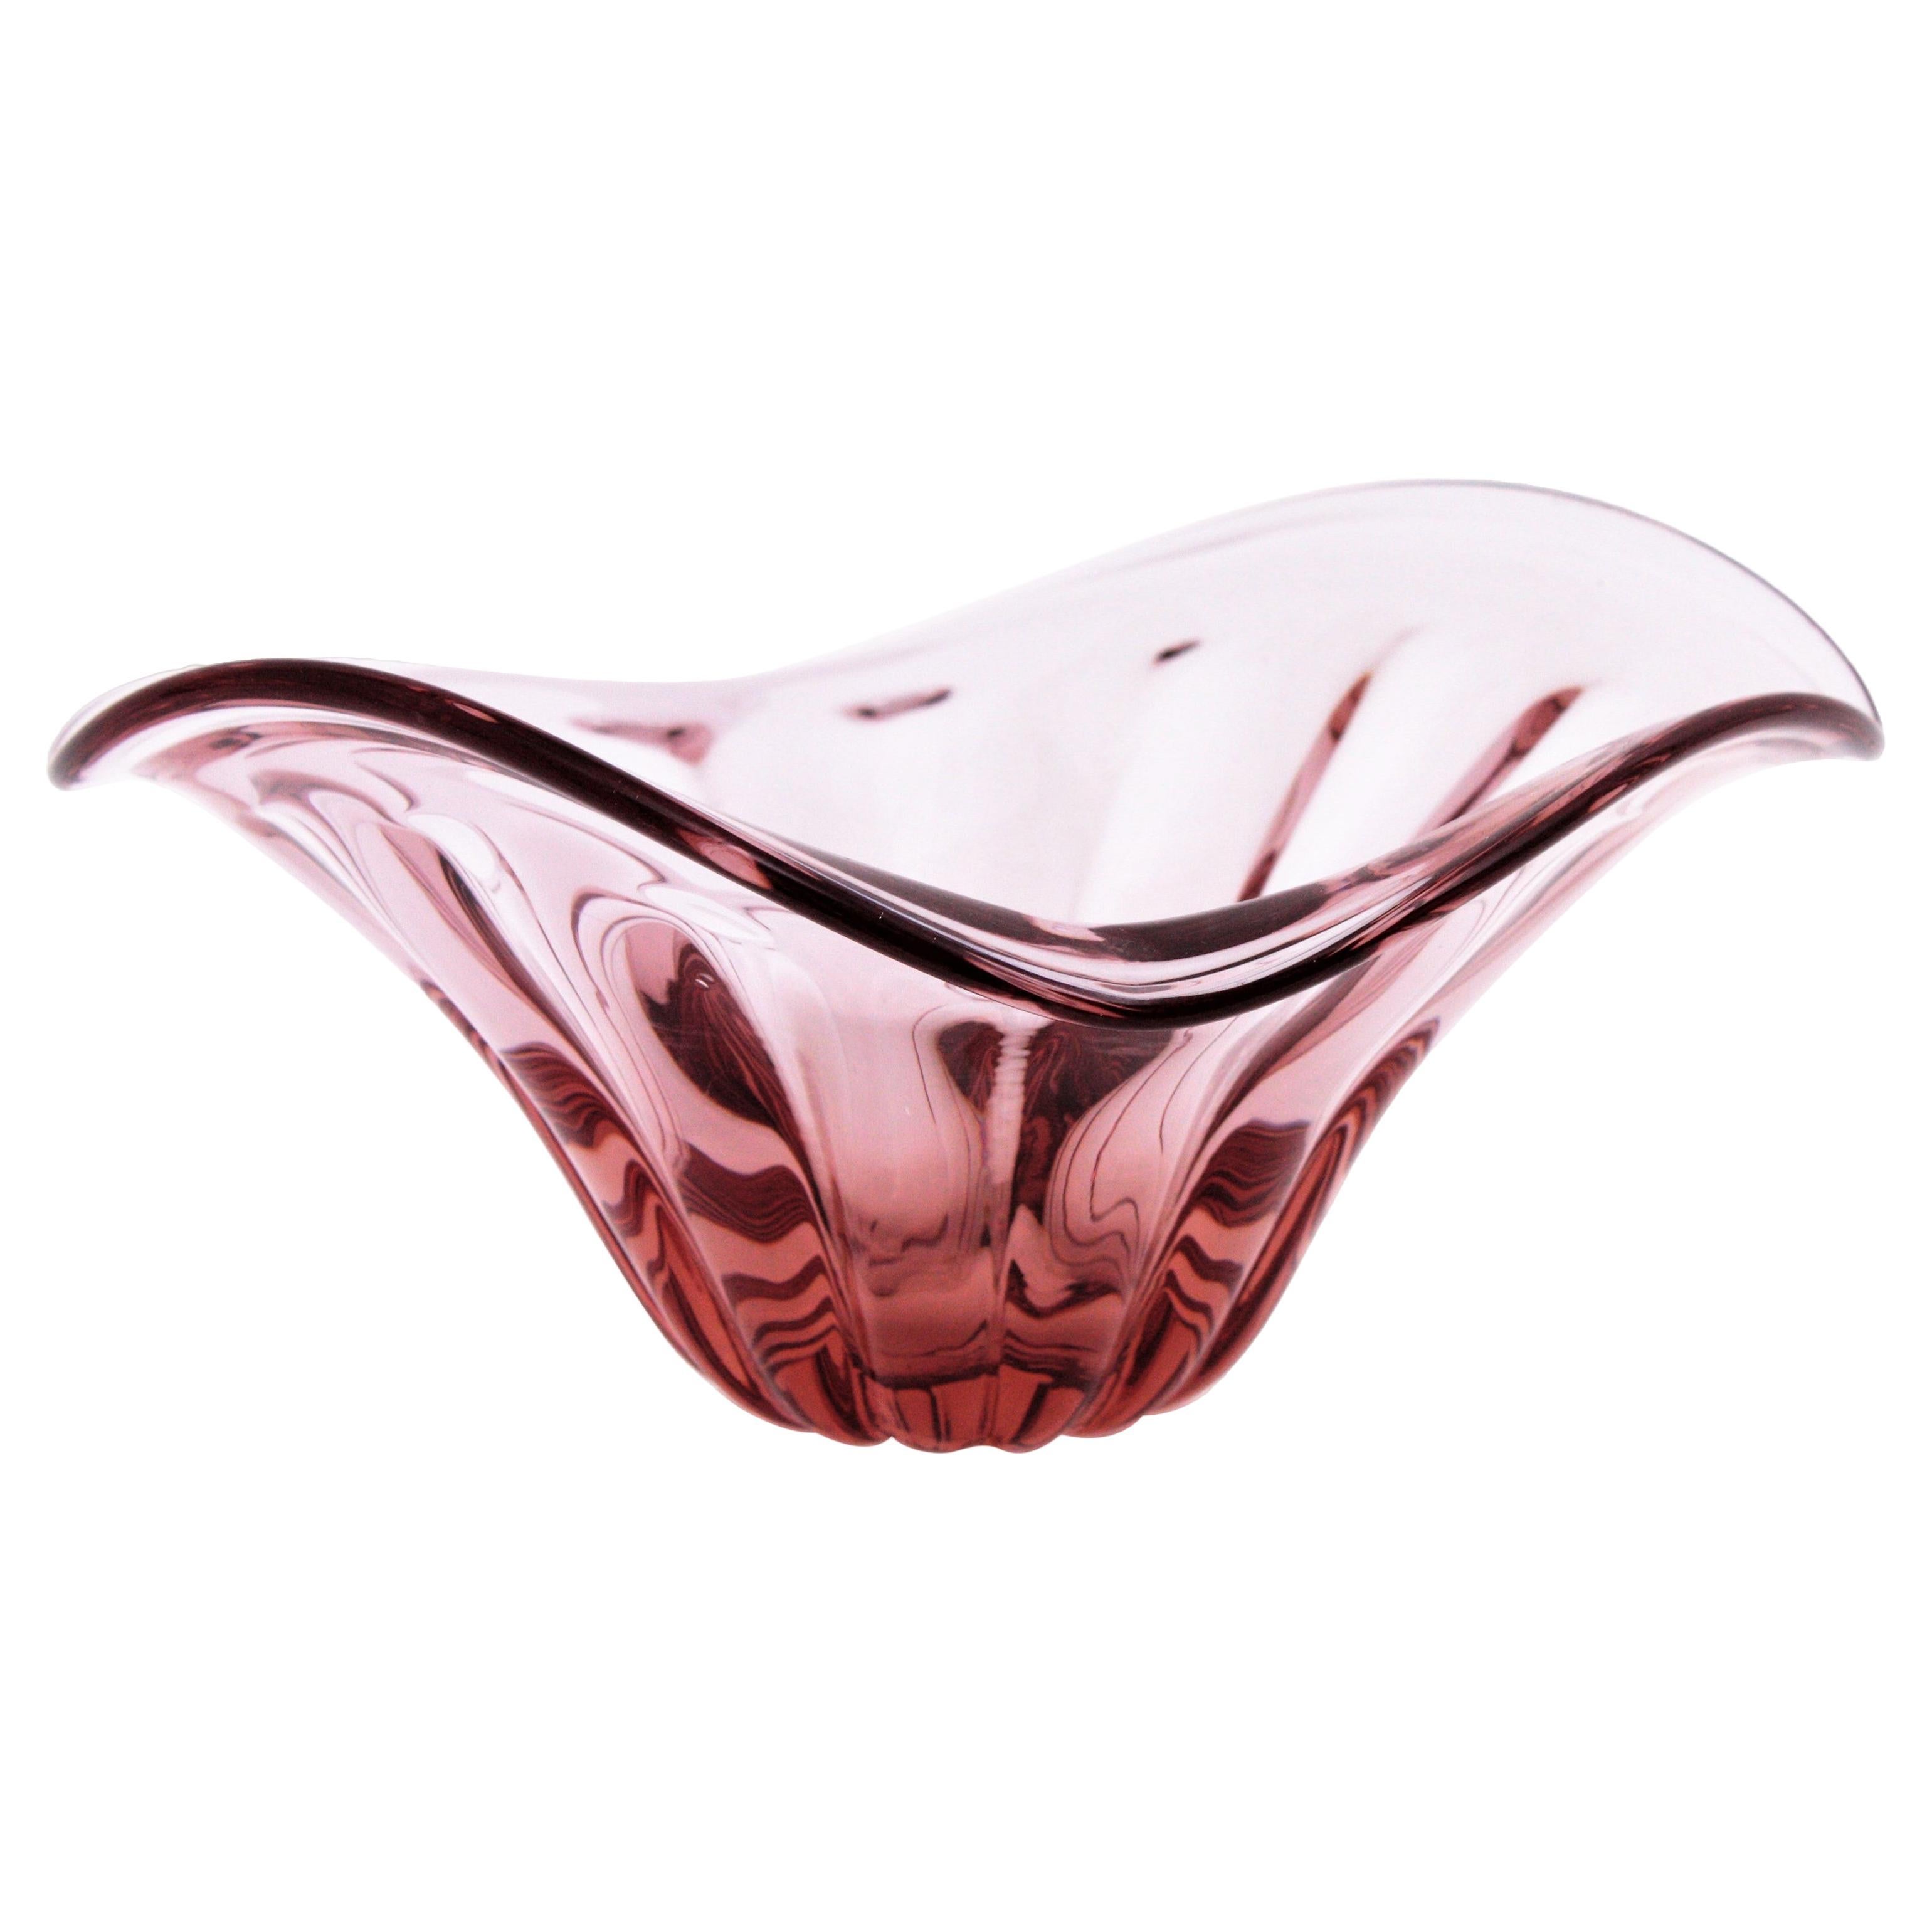 Alfredo Barbini Murano Pink Sommerso Ribbed Glass Centerpiece Bowl, 1950s For Sale